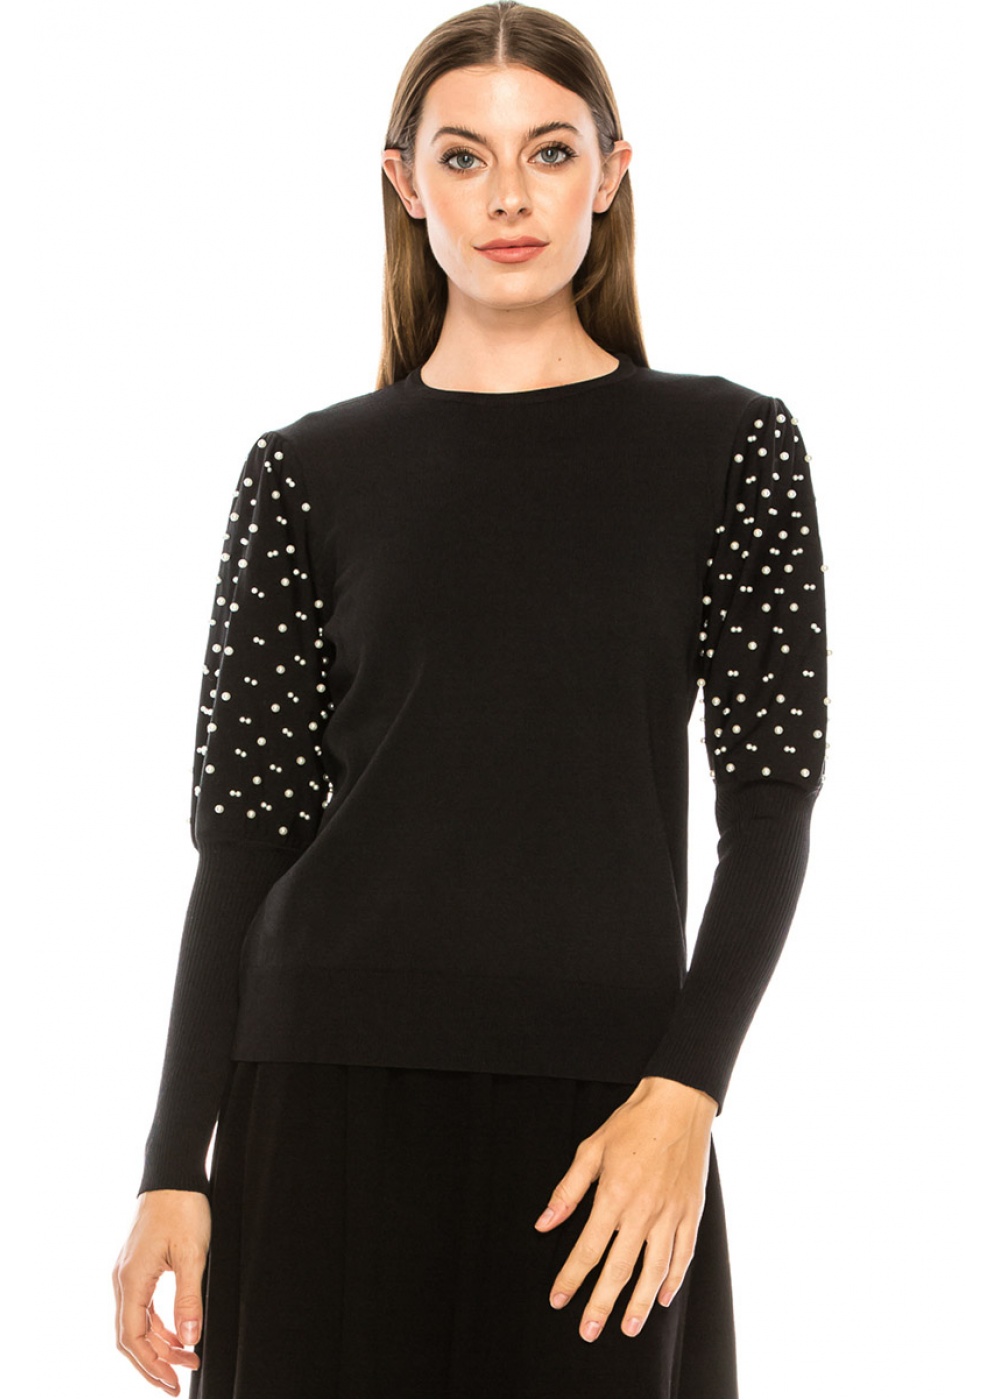 Juliet sleeves sweater with pearls